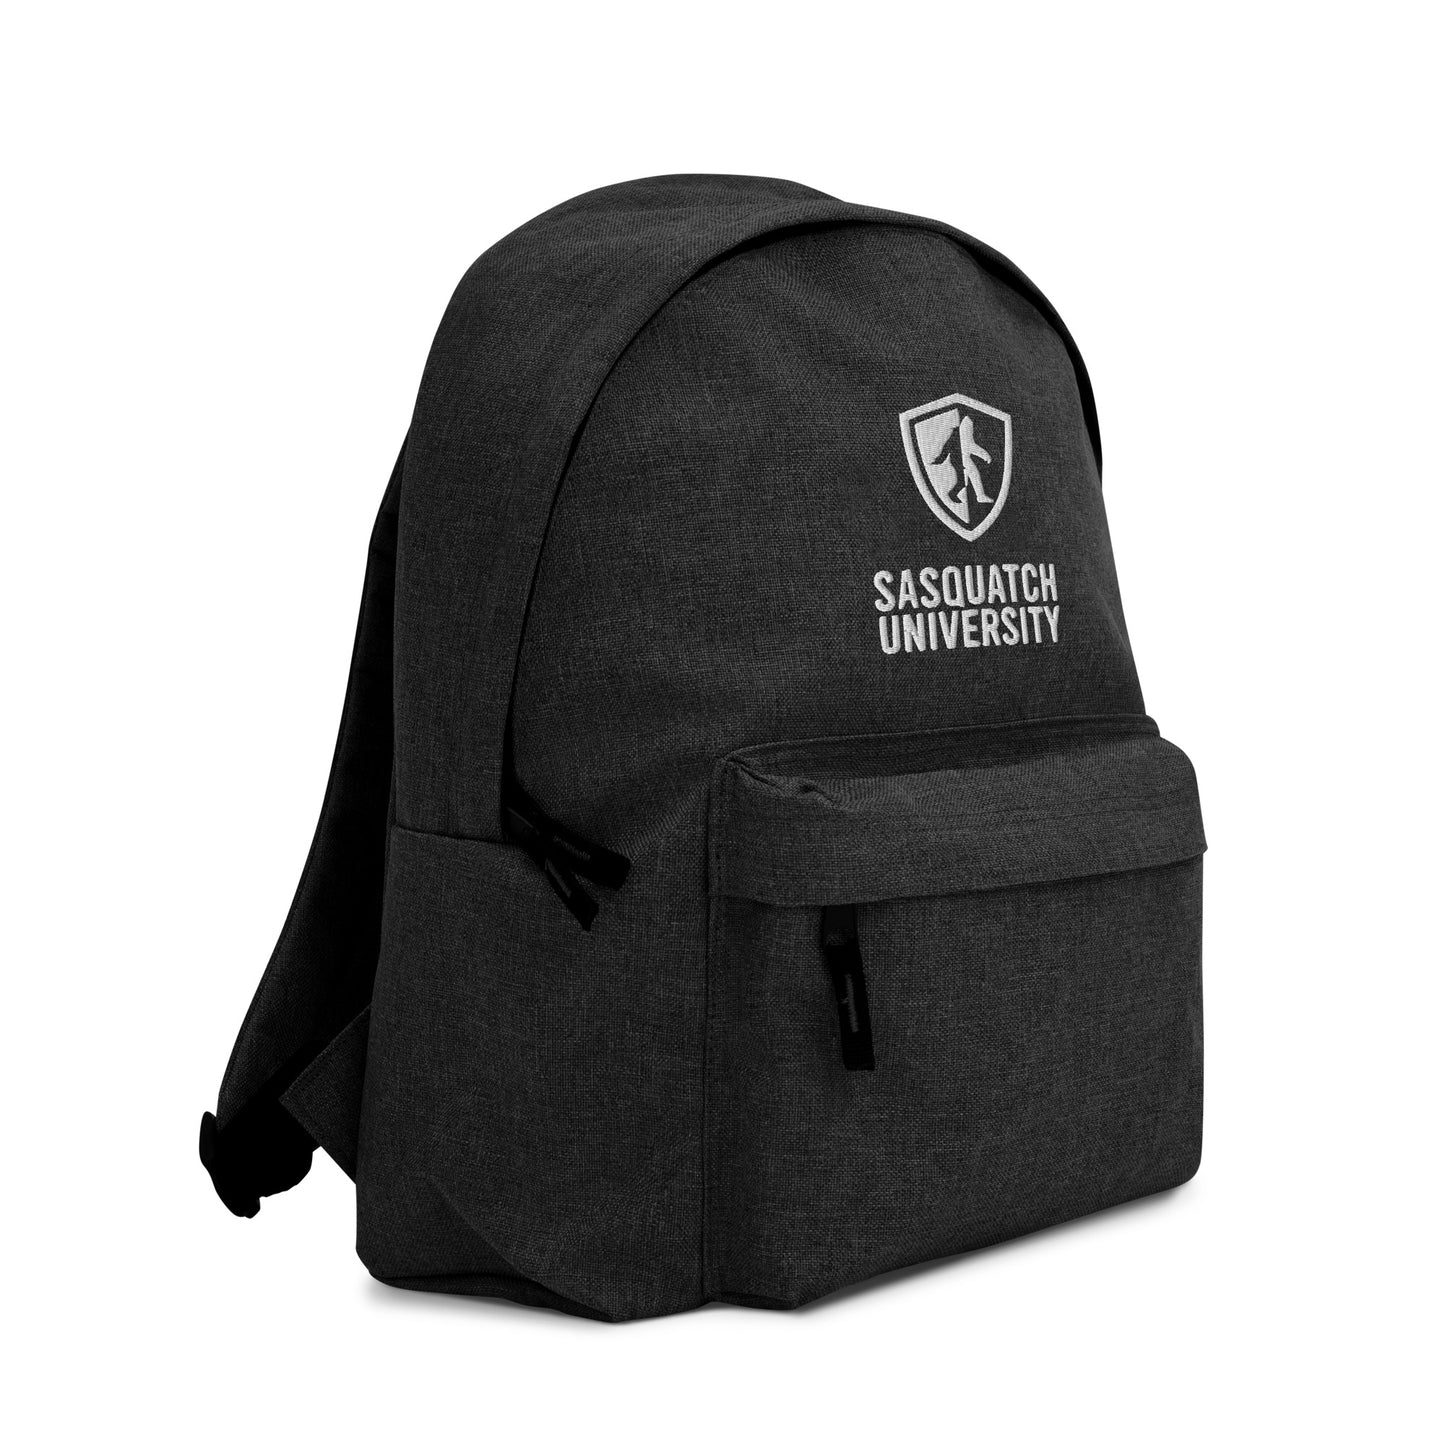 Sasquatch University Embroidered Backpack